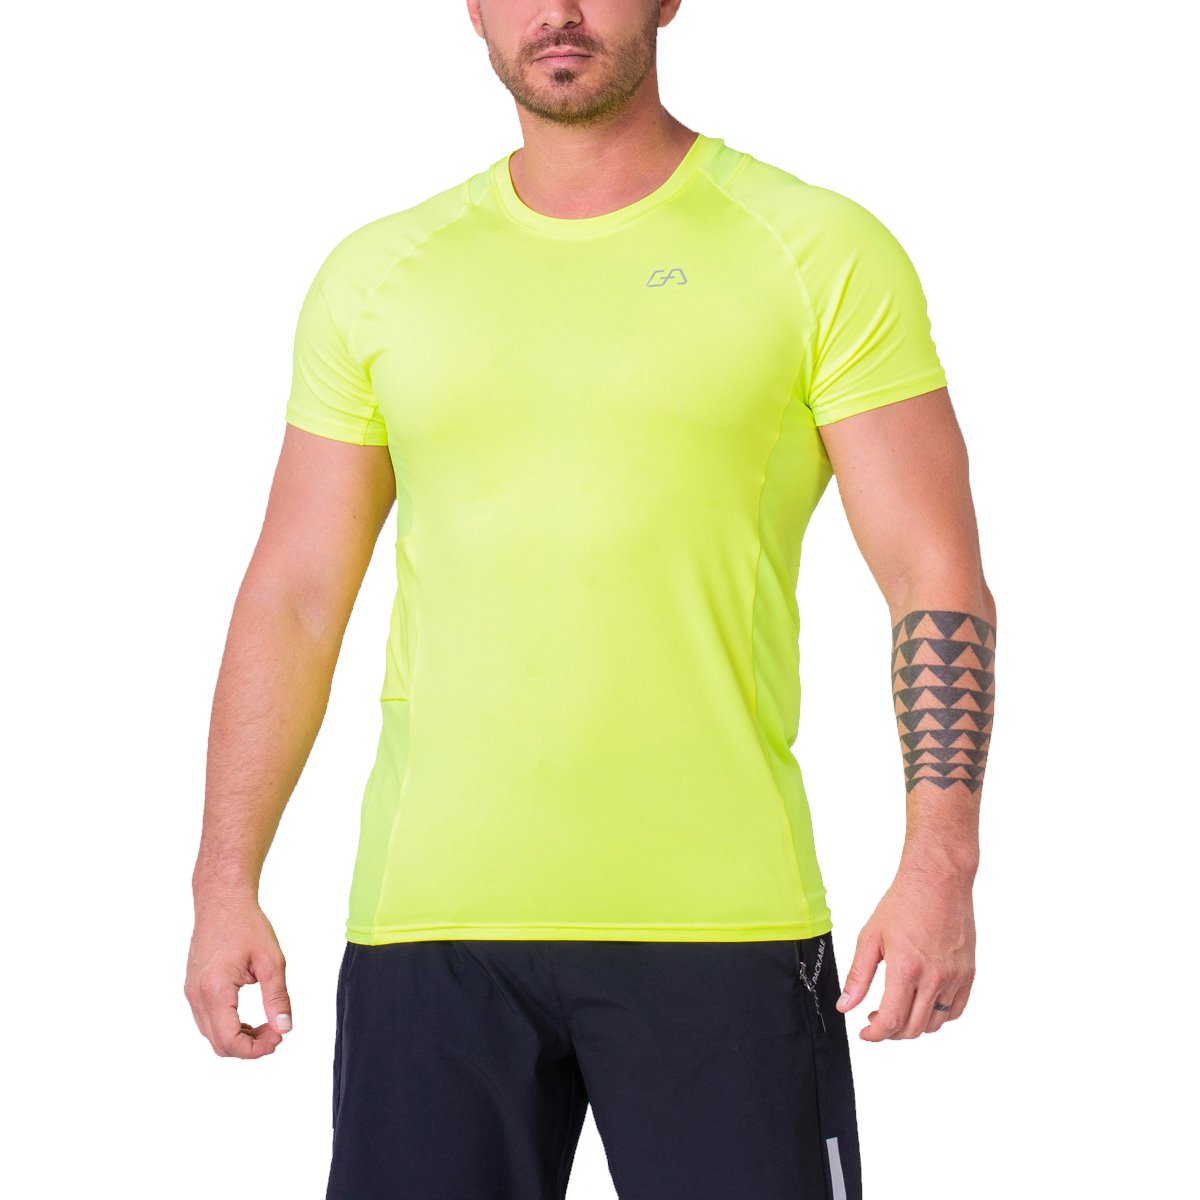 Relaxed Fit T-shirt - Yellow - Men